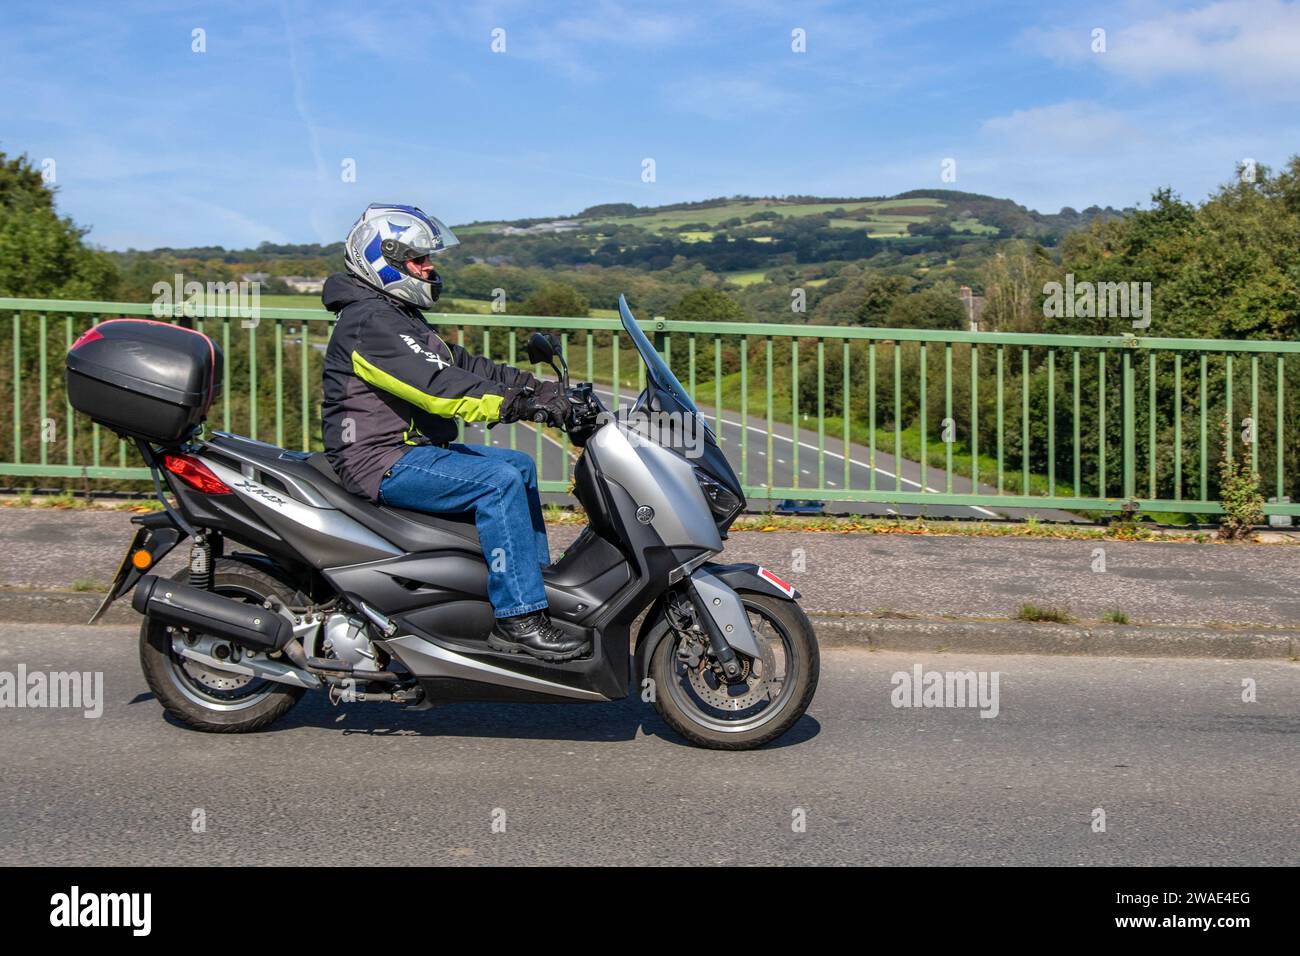 2018 Grey Yamaha X-Max 125 Abs Single EU4 Motorcycle Maxi Scooter Petrol 124 cc premium learner friendly maxi scooter, 125cc, EU4-compliant engine bike; crossing motorway bridge in Greater Manchester, UK Stock Photo